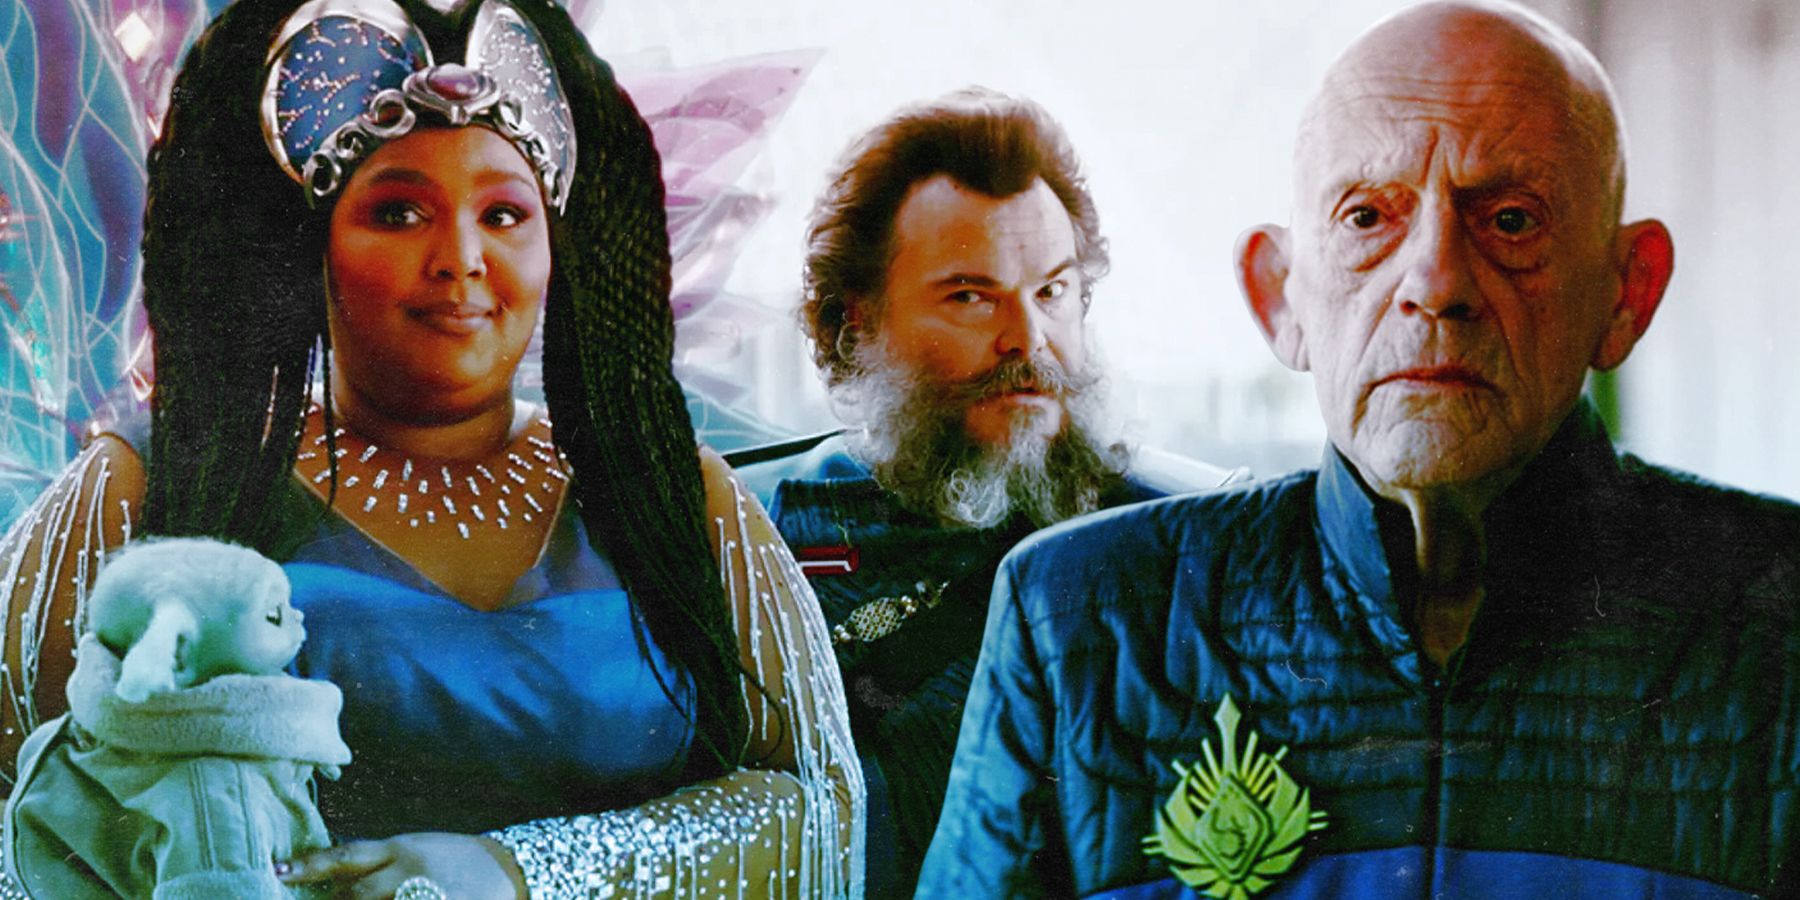 On the left, The Duchess, played by Lizzo, holds Grogu and smiles coyly as Captain Bombardier, played by Jack Black, stands beside her and arches his brows while in conversation. On the right, Commissioner Helgait, played by Christopher Lloyd, stares solemnly. 